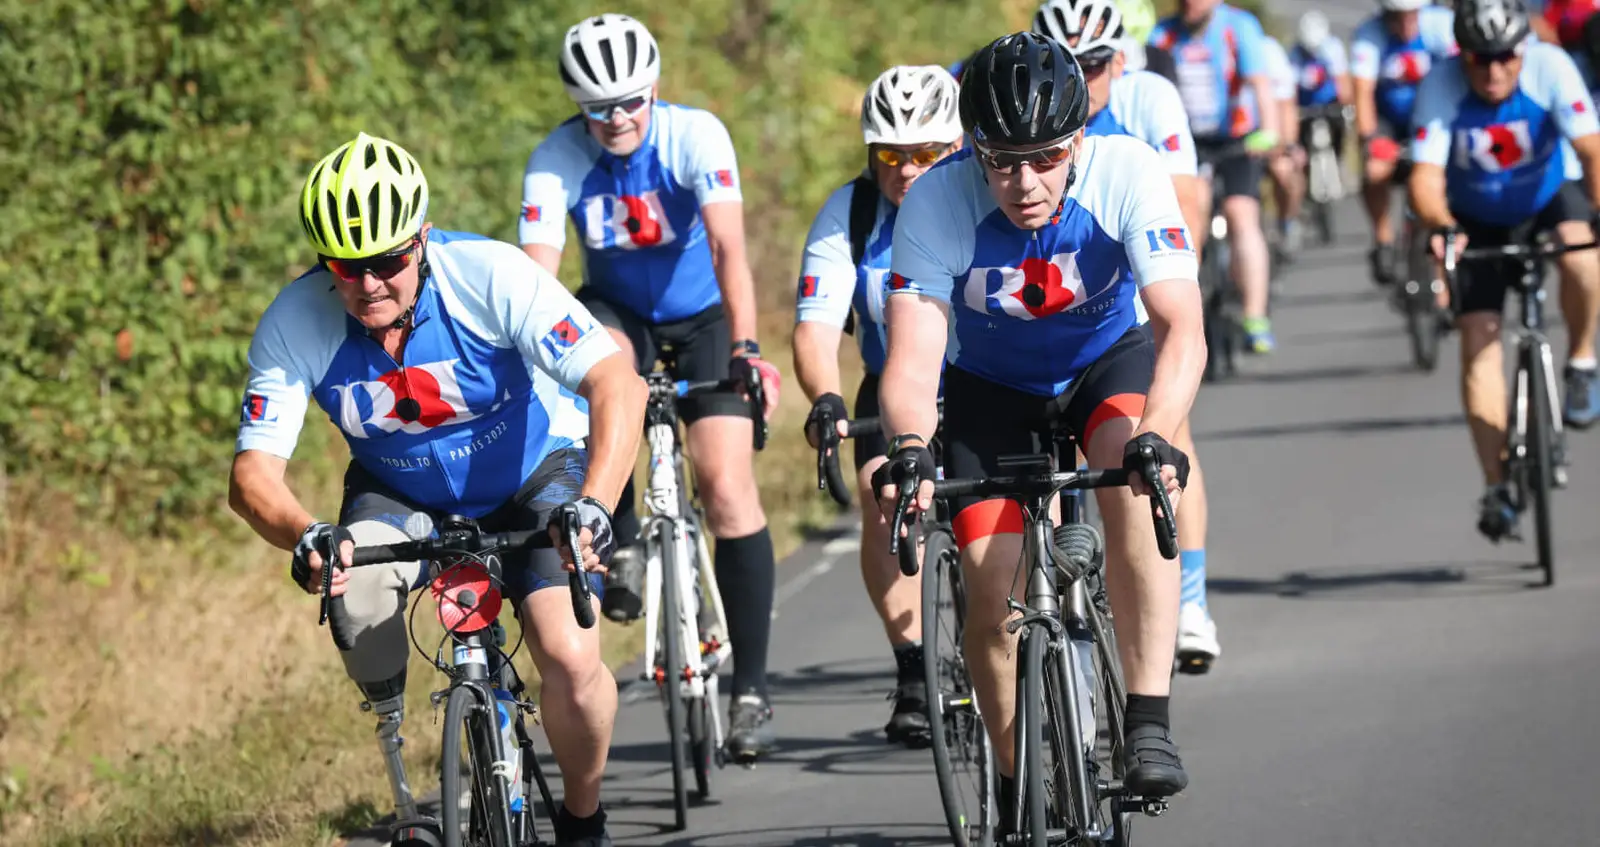 Cyclists riding @ Pedal to Paris 2022 - Day 4